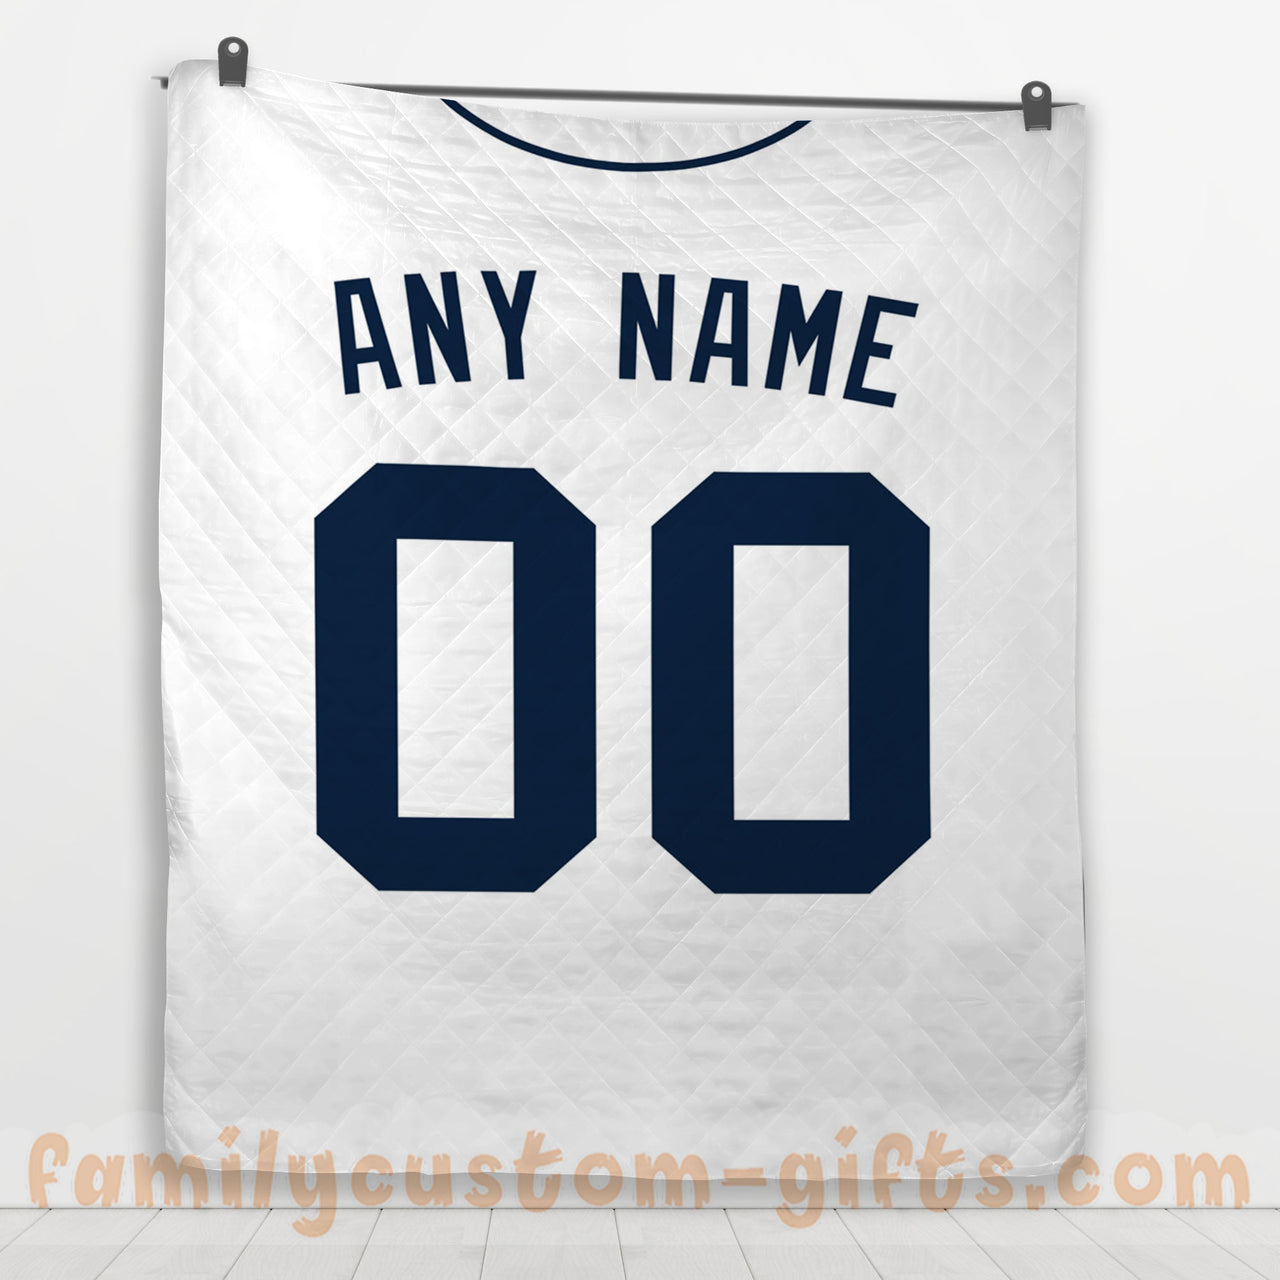 Custom Premium Quilt Blanket Detroit Jersey Baseball Personalized Quilt Gifts for Her & Him